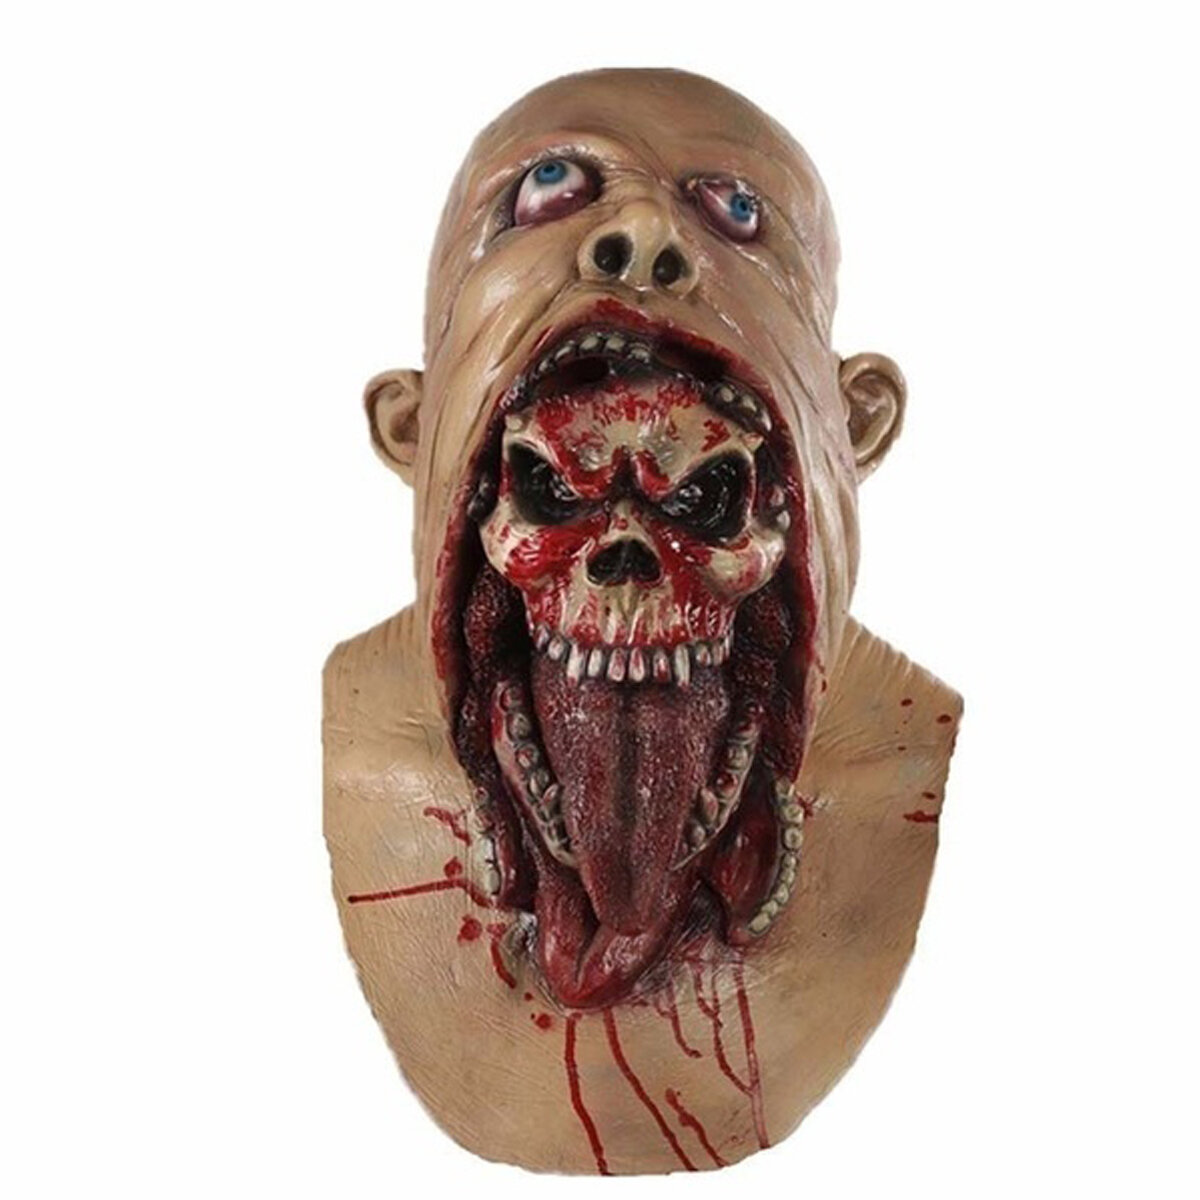 

Bloody Zombie Mask Melting Face Adult Latex Costume Halloween Scary Party Head